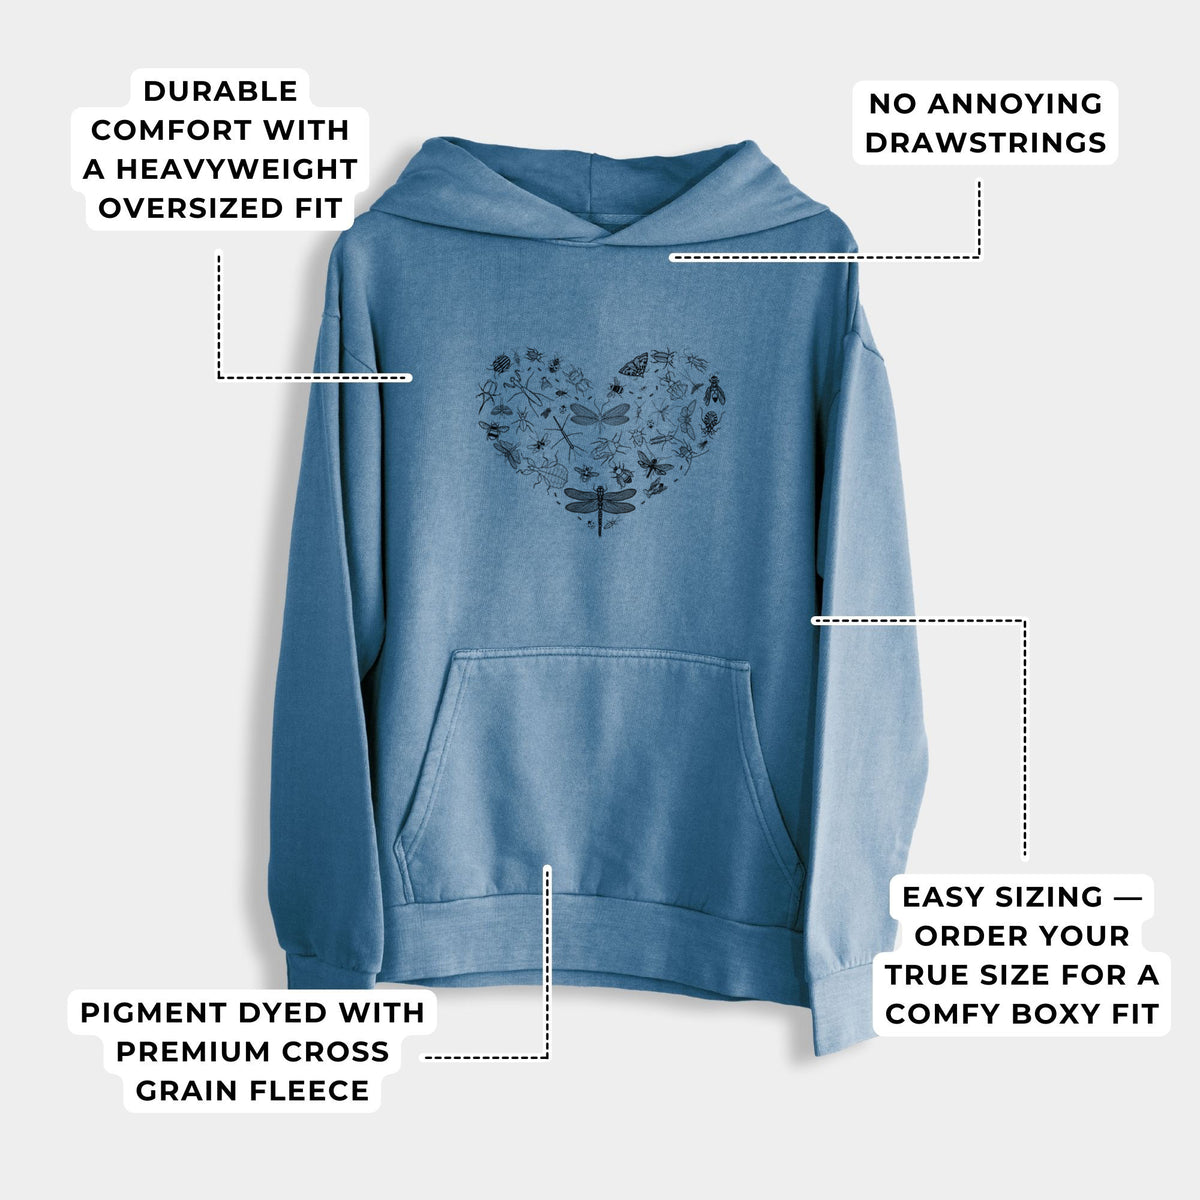 Heart Full of Insects  - Urban Heavyweight Hoodie